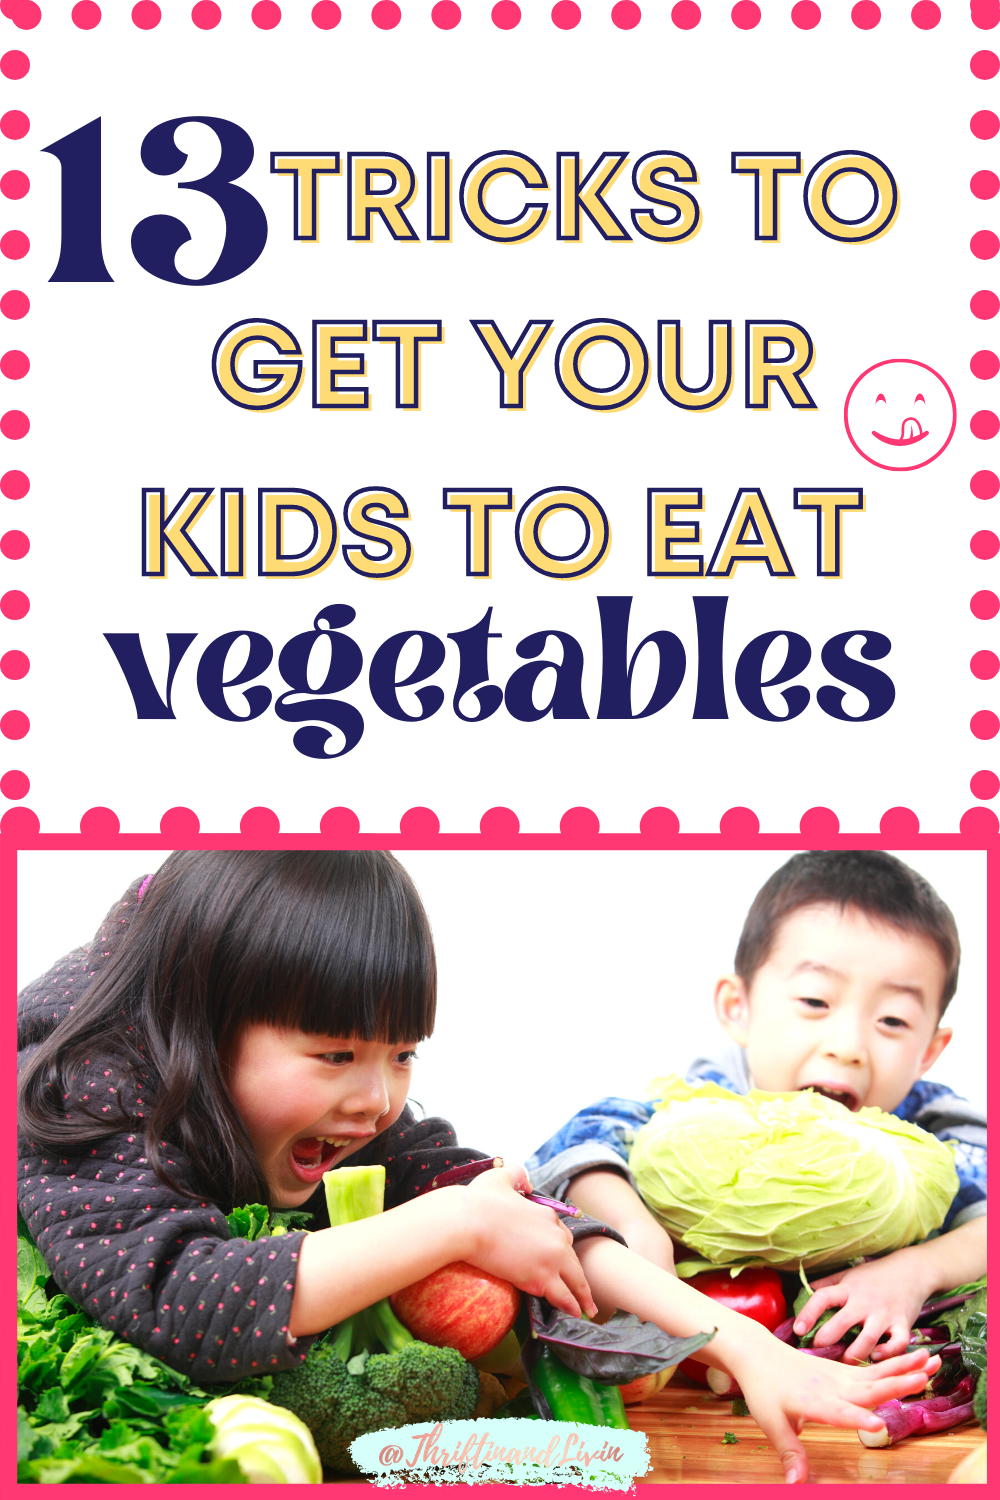 Navy and yellow heading that says "13 tricks to get your kids to eat vegetables" in primarily capital letters. The background is white with an image below the heading. The image is two children scooping up armfuls of fresh vegetables.